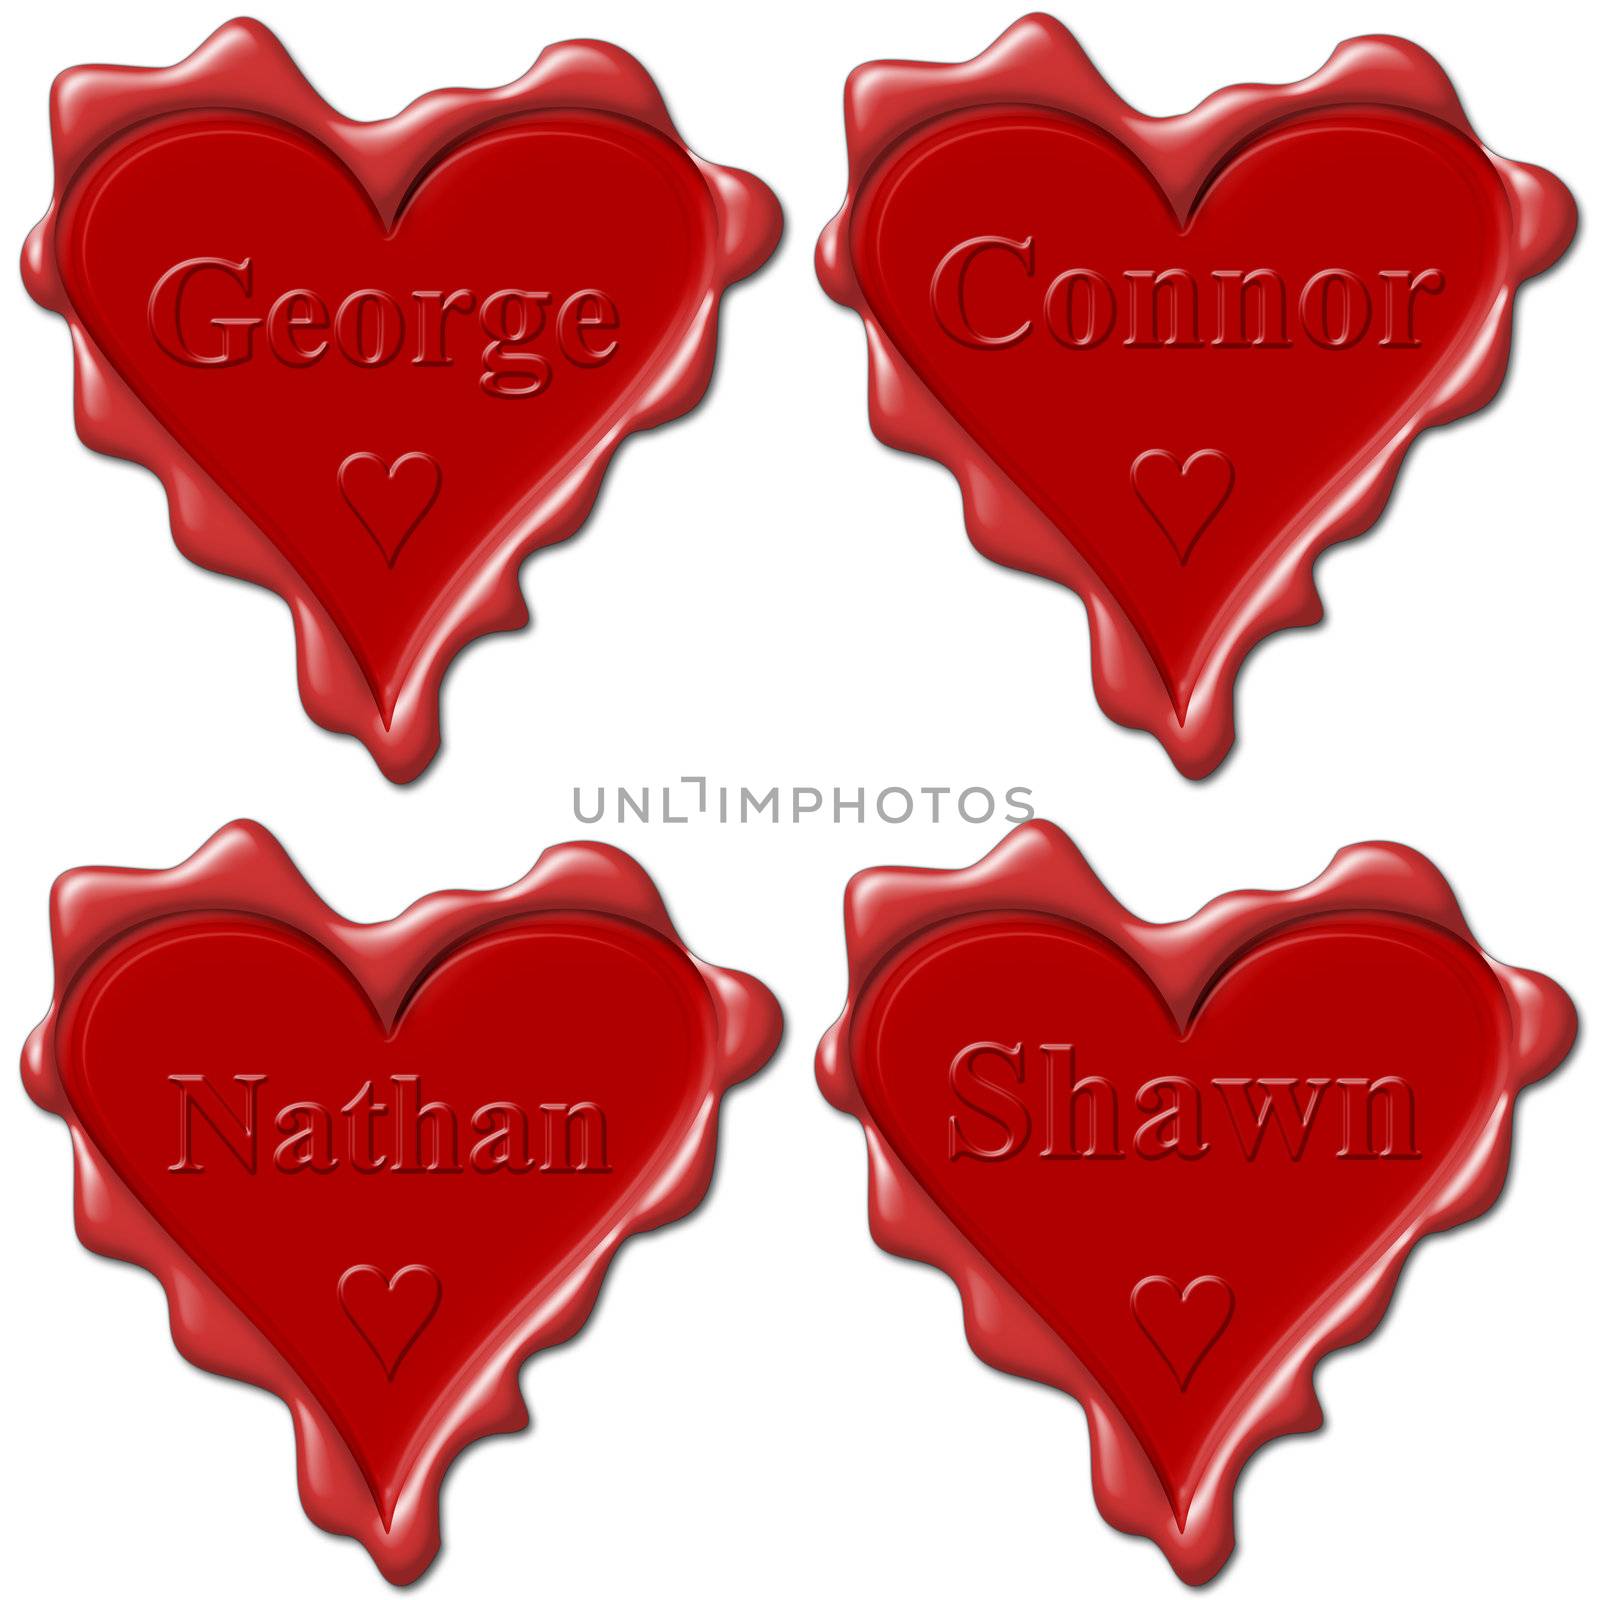 Valentine love hearts with names: George, Connor, Nathan, Shawn, 